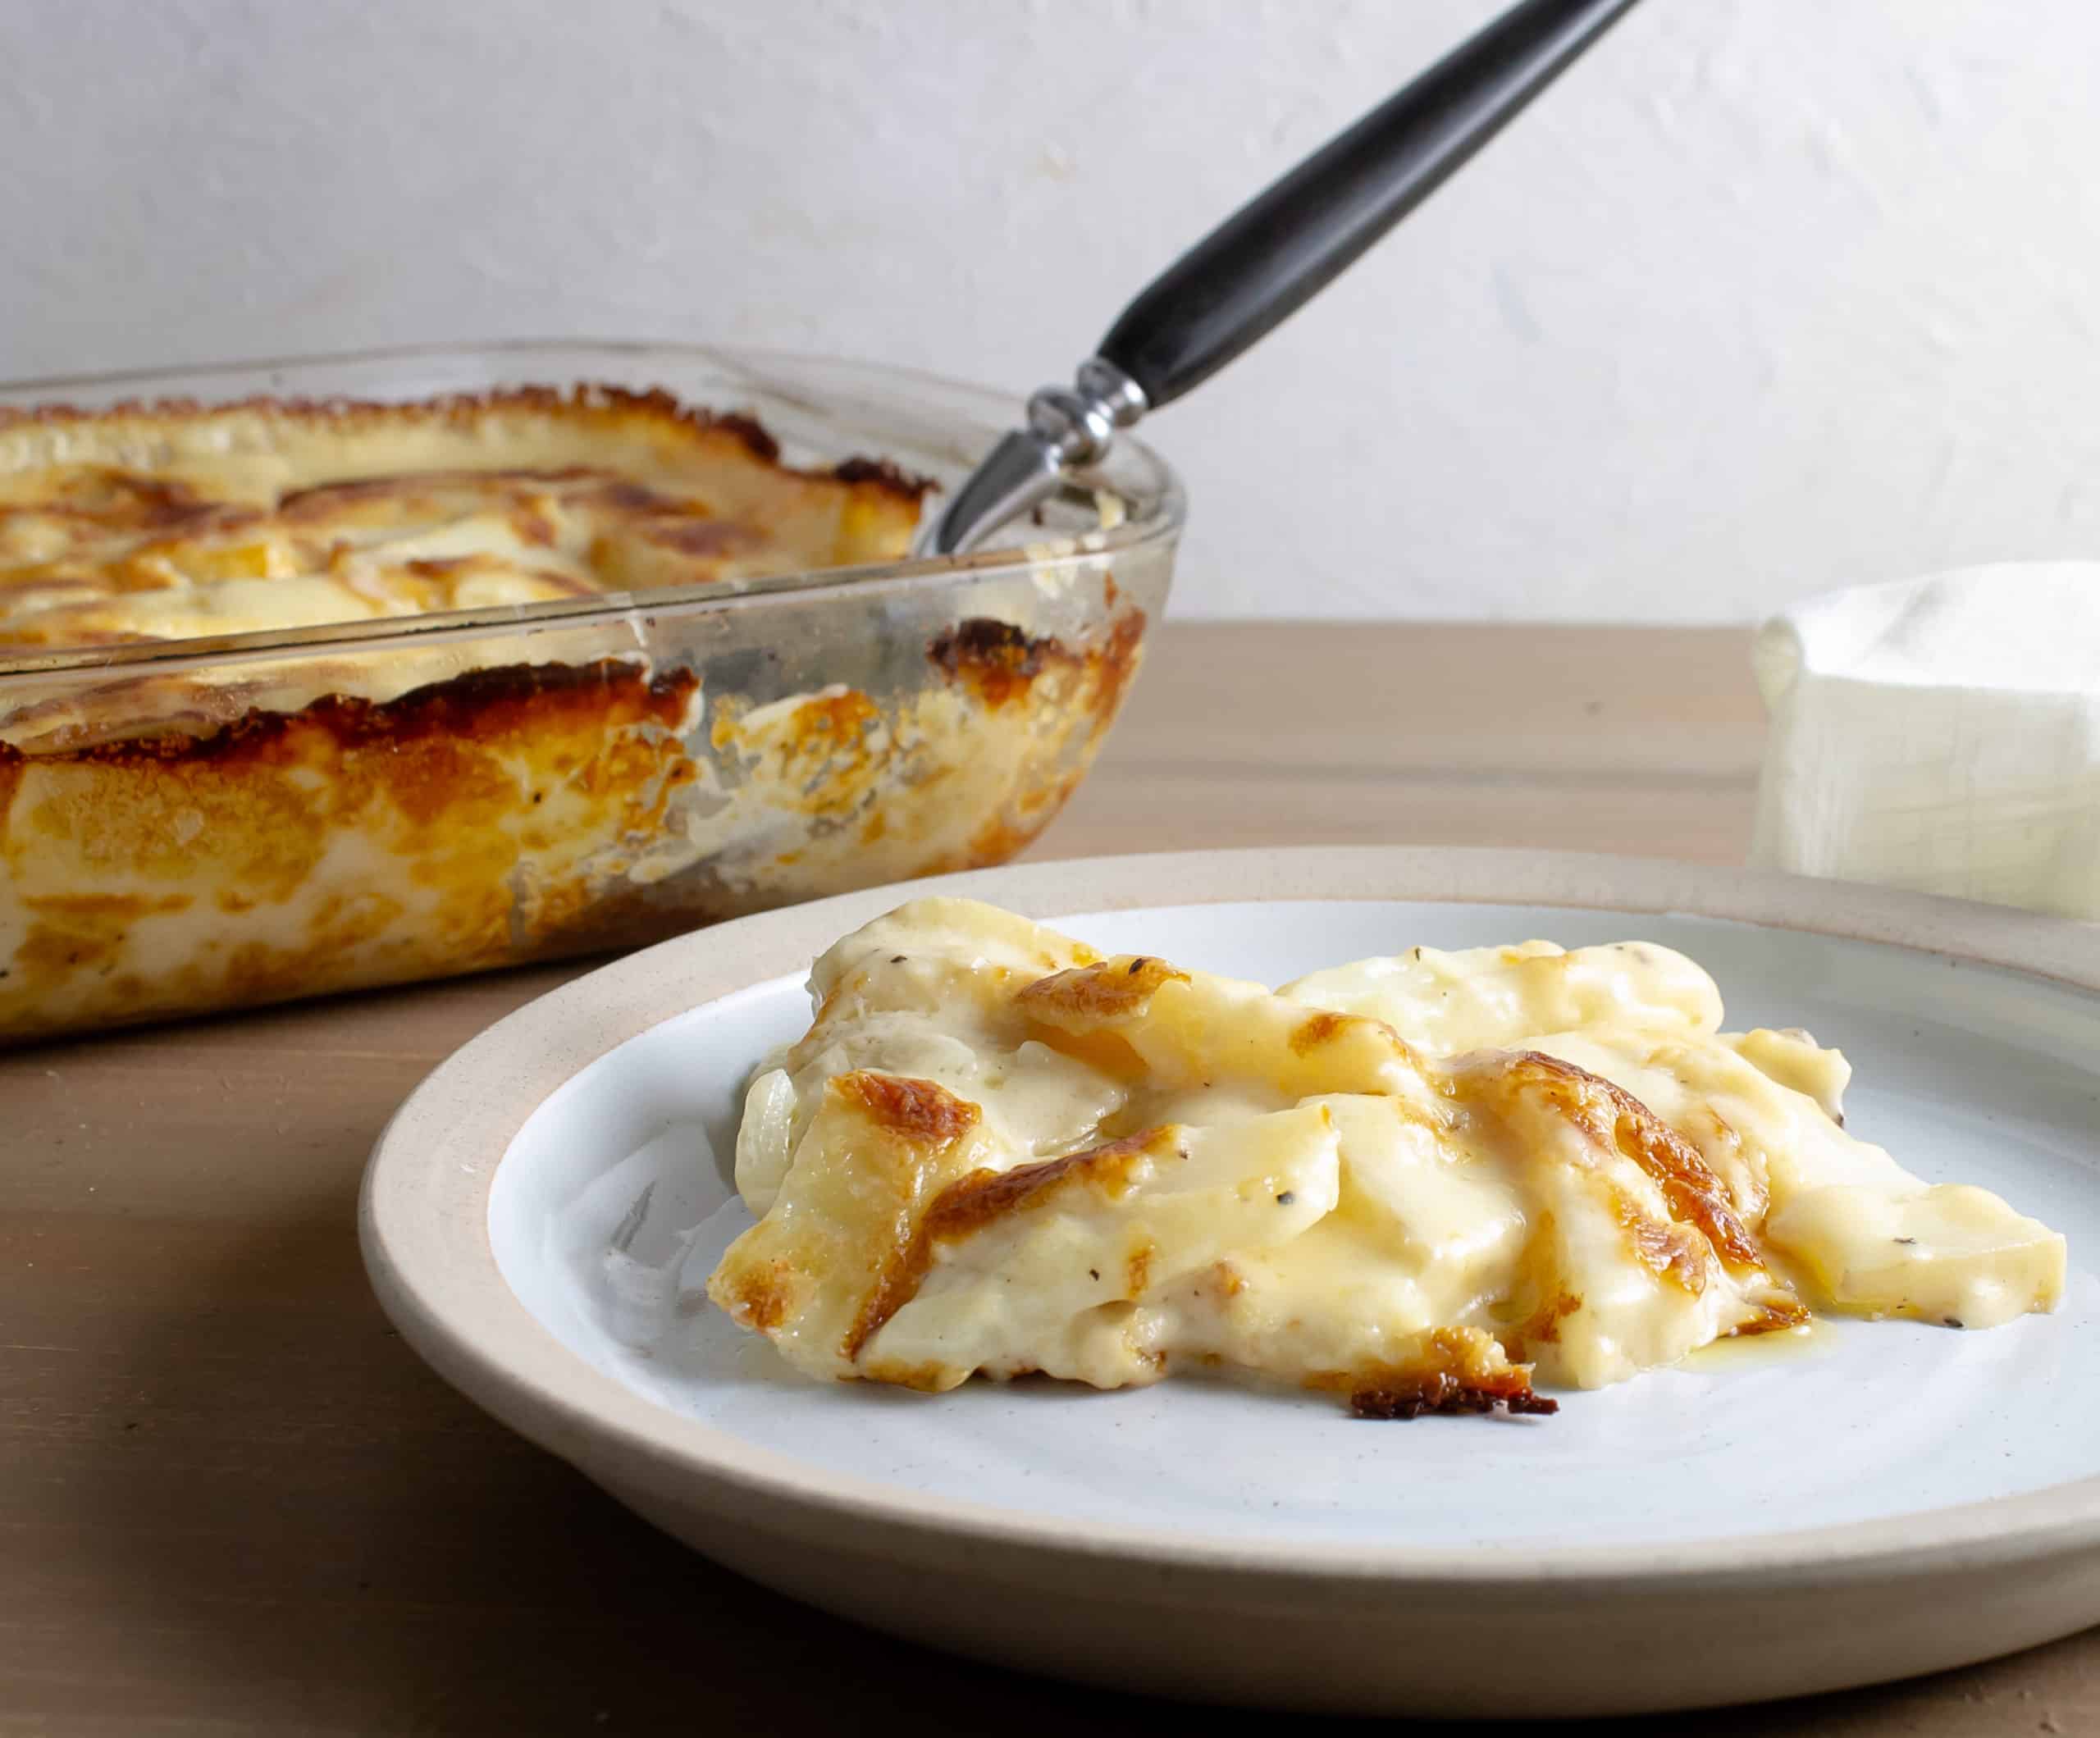 This cheese potato bake recipe is so good that I doubt you'll have leftovers. It's a great casserole dish that reheats well, too.